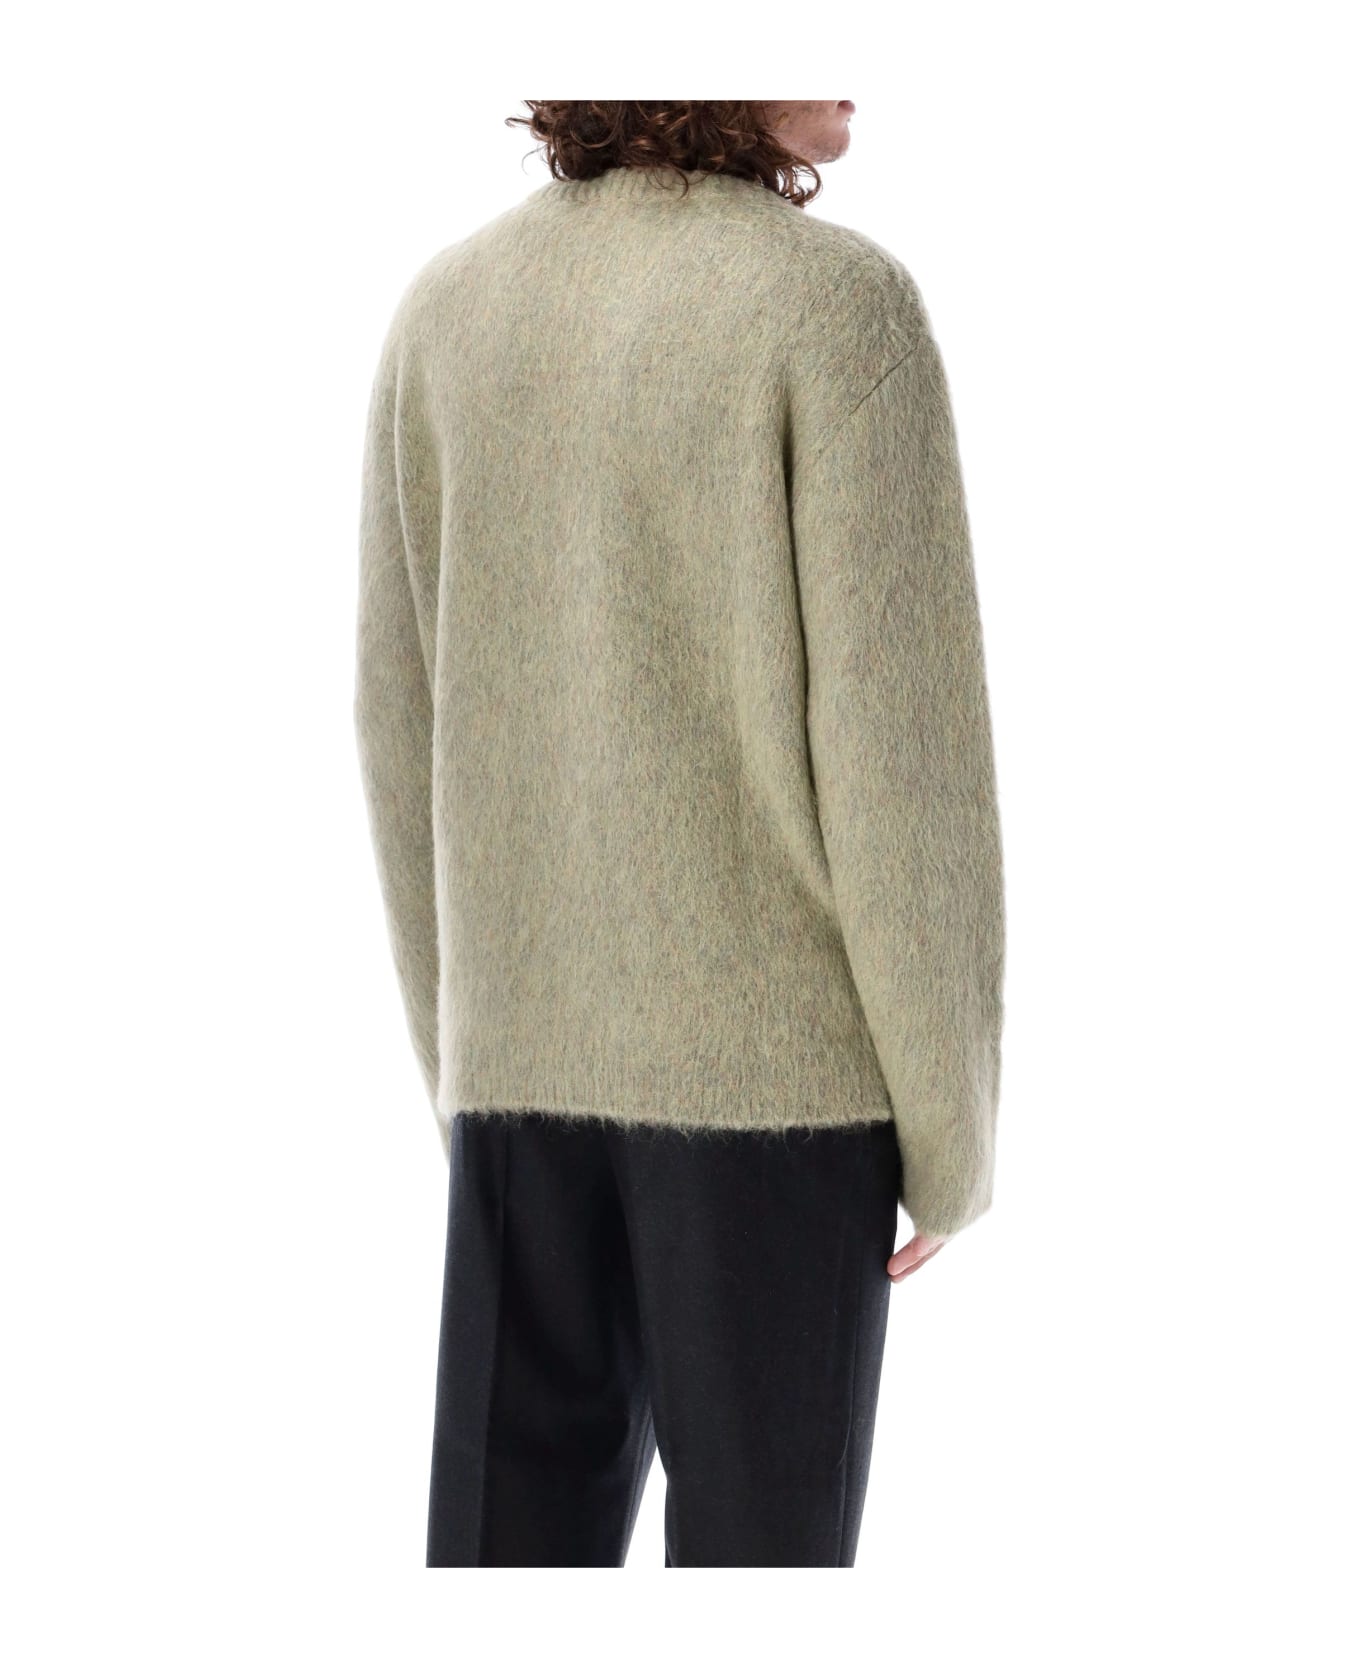 Lemaire Brushed Sweater - GREY